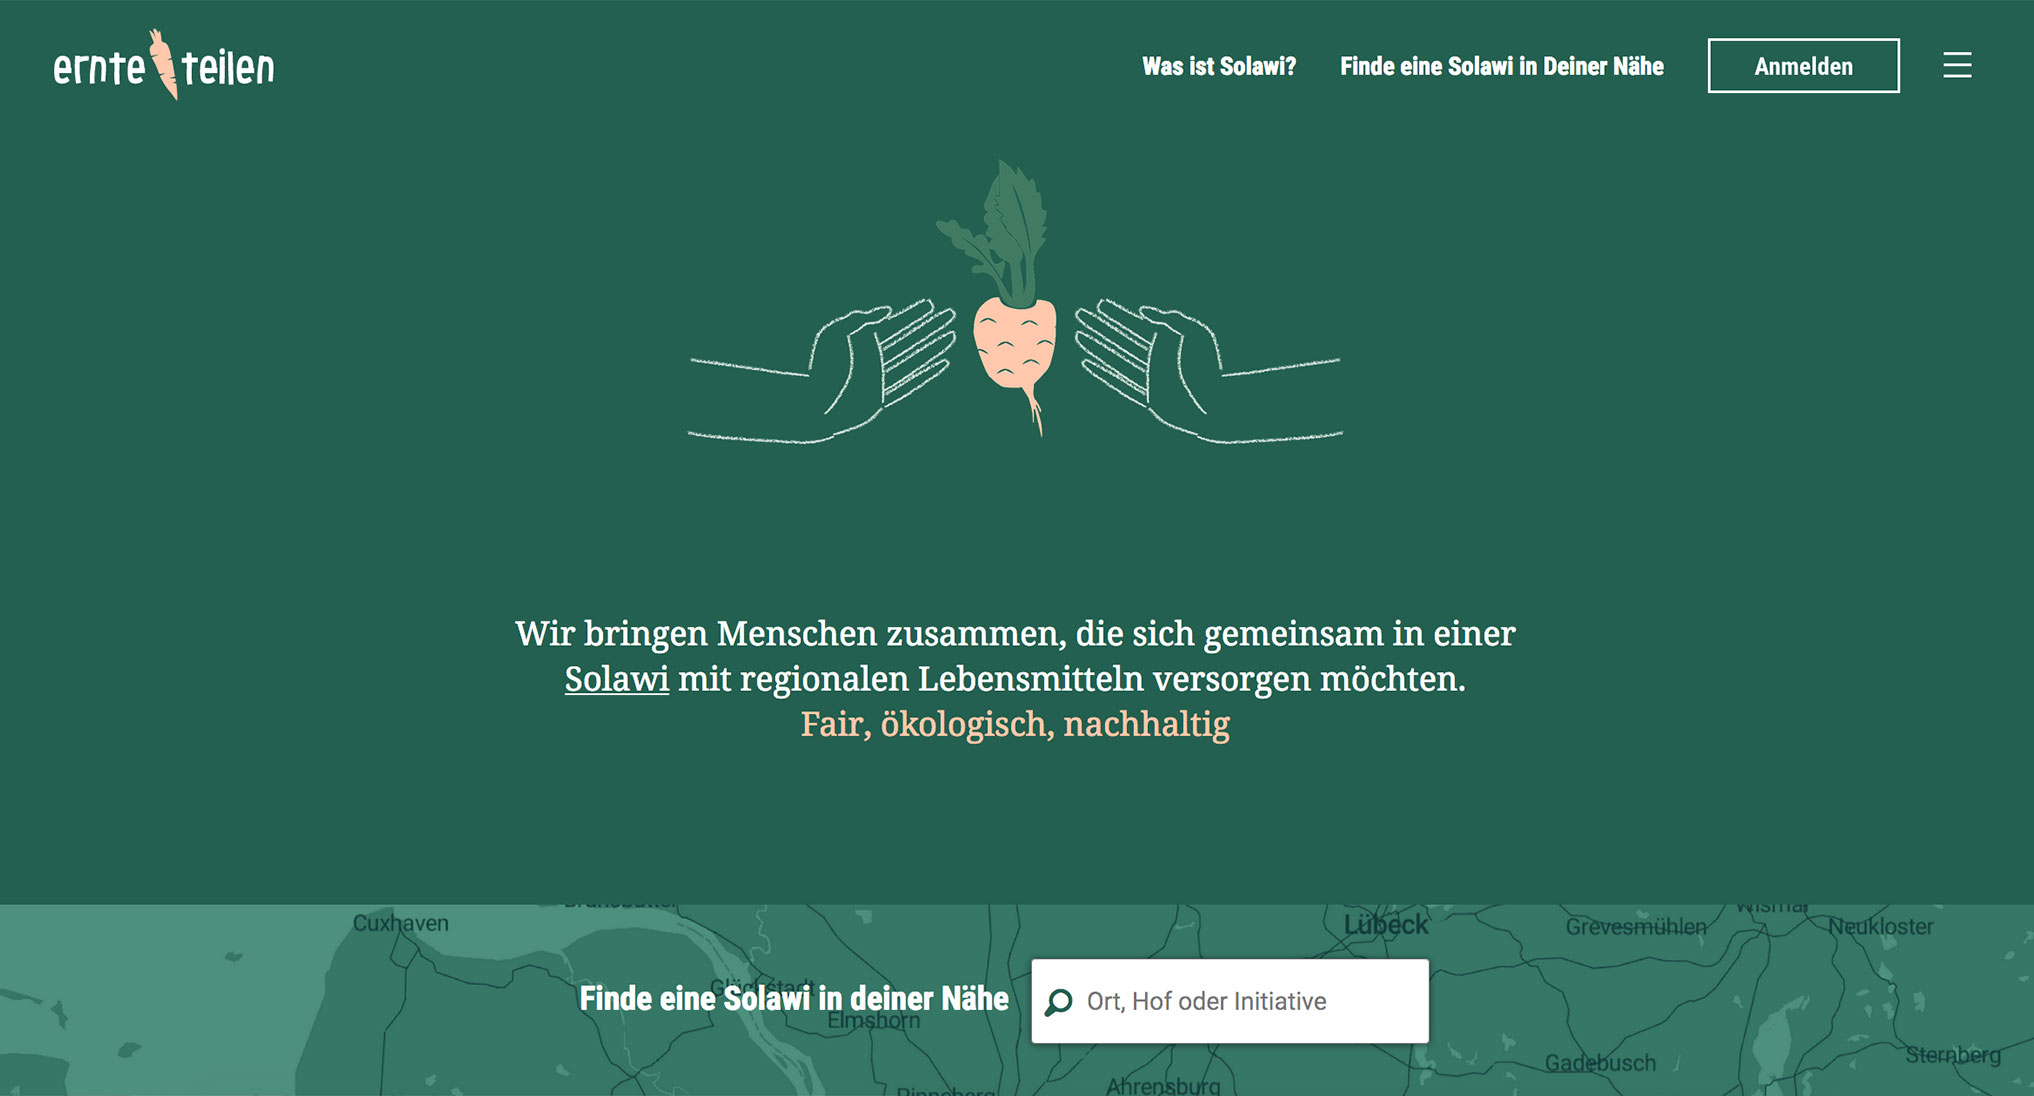 Screenshot from ernte-teilen.org showing a large illustration of hands holding a beet